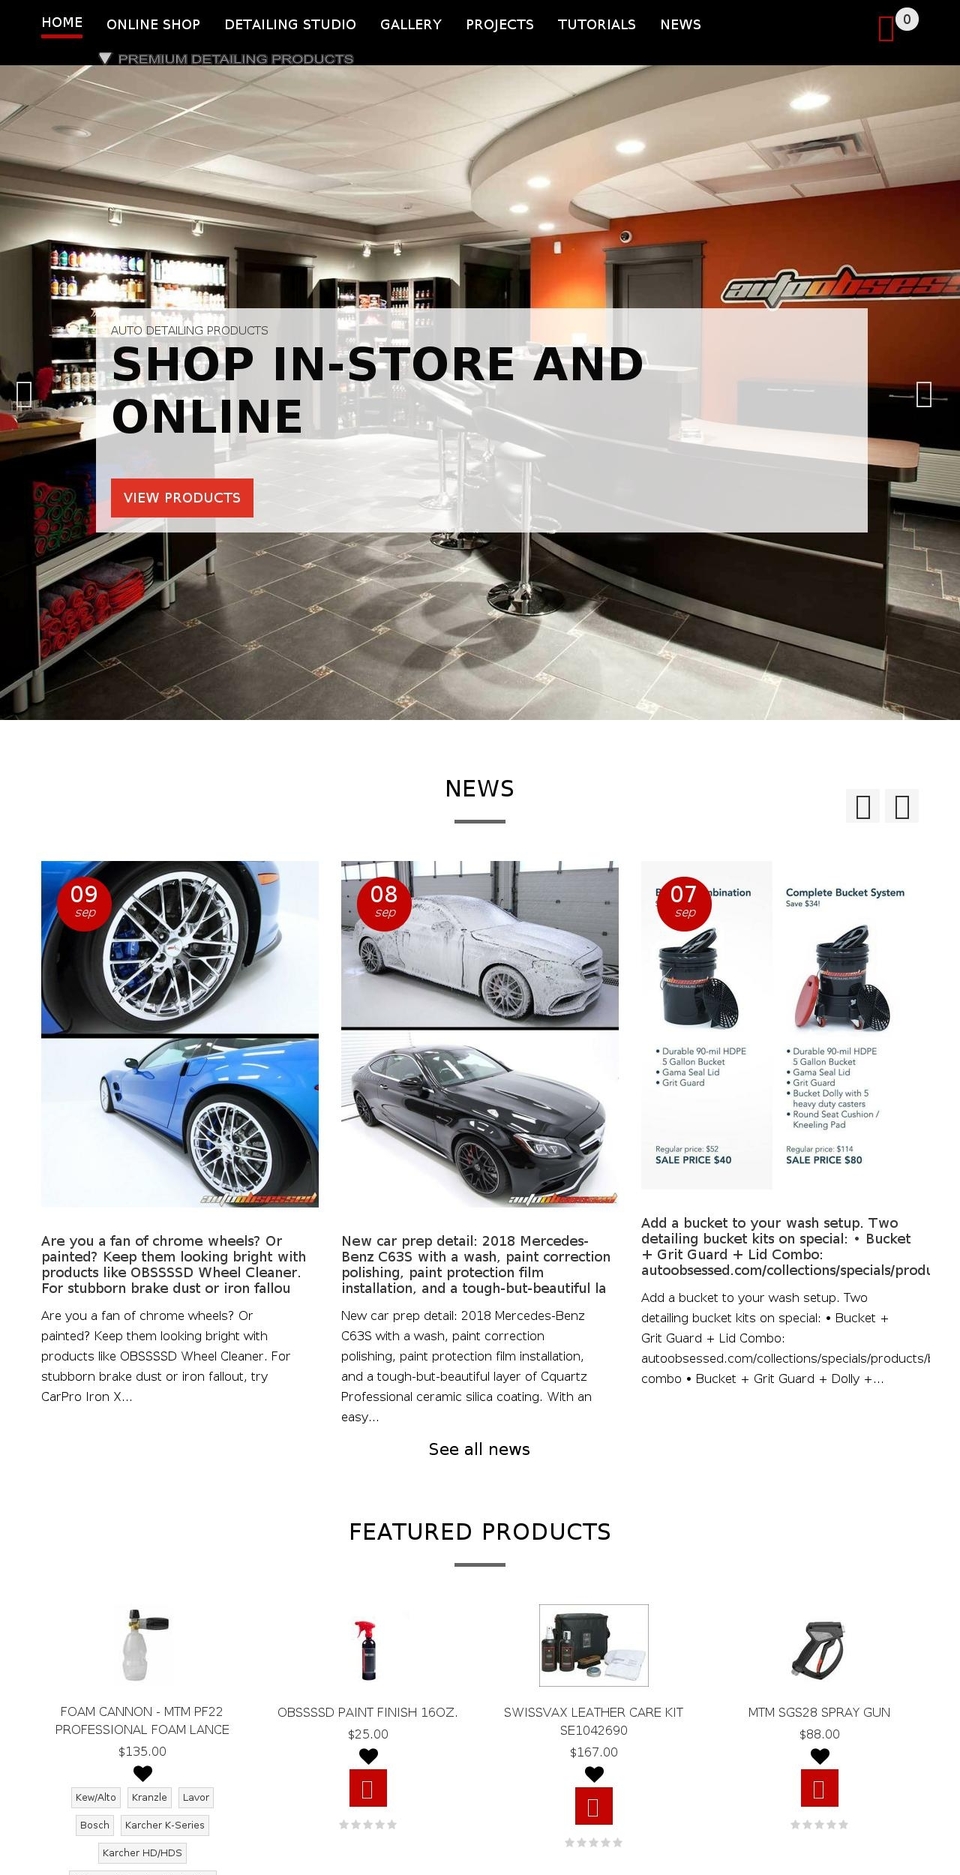 auto-obsession.info shopify website screenshot